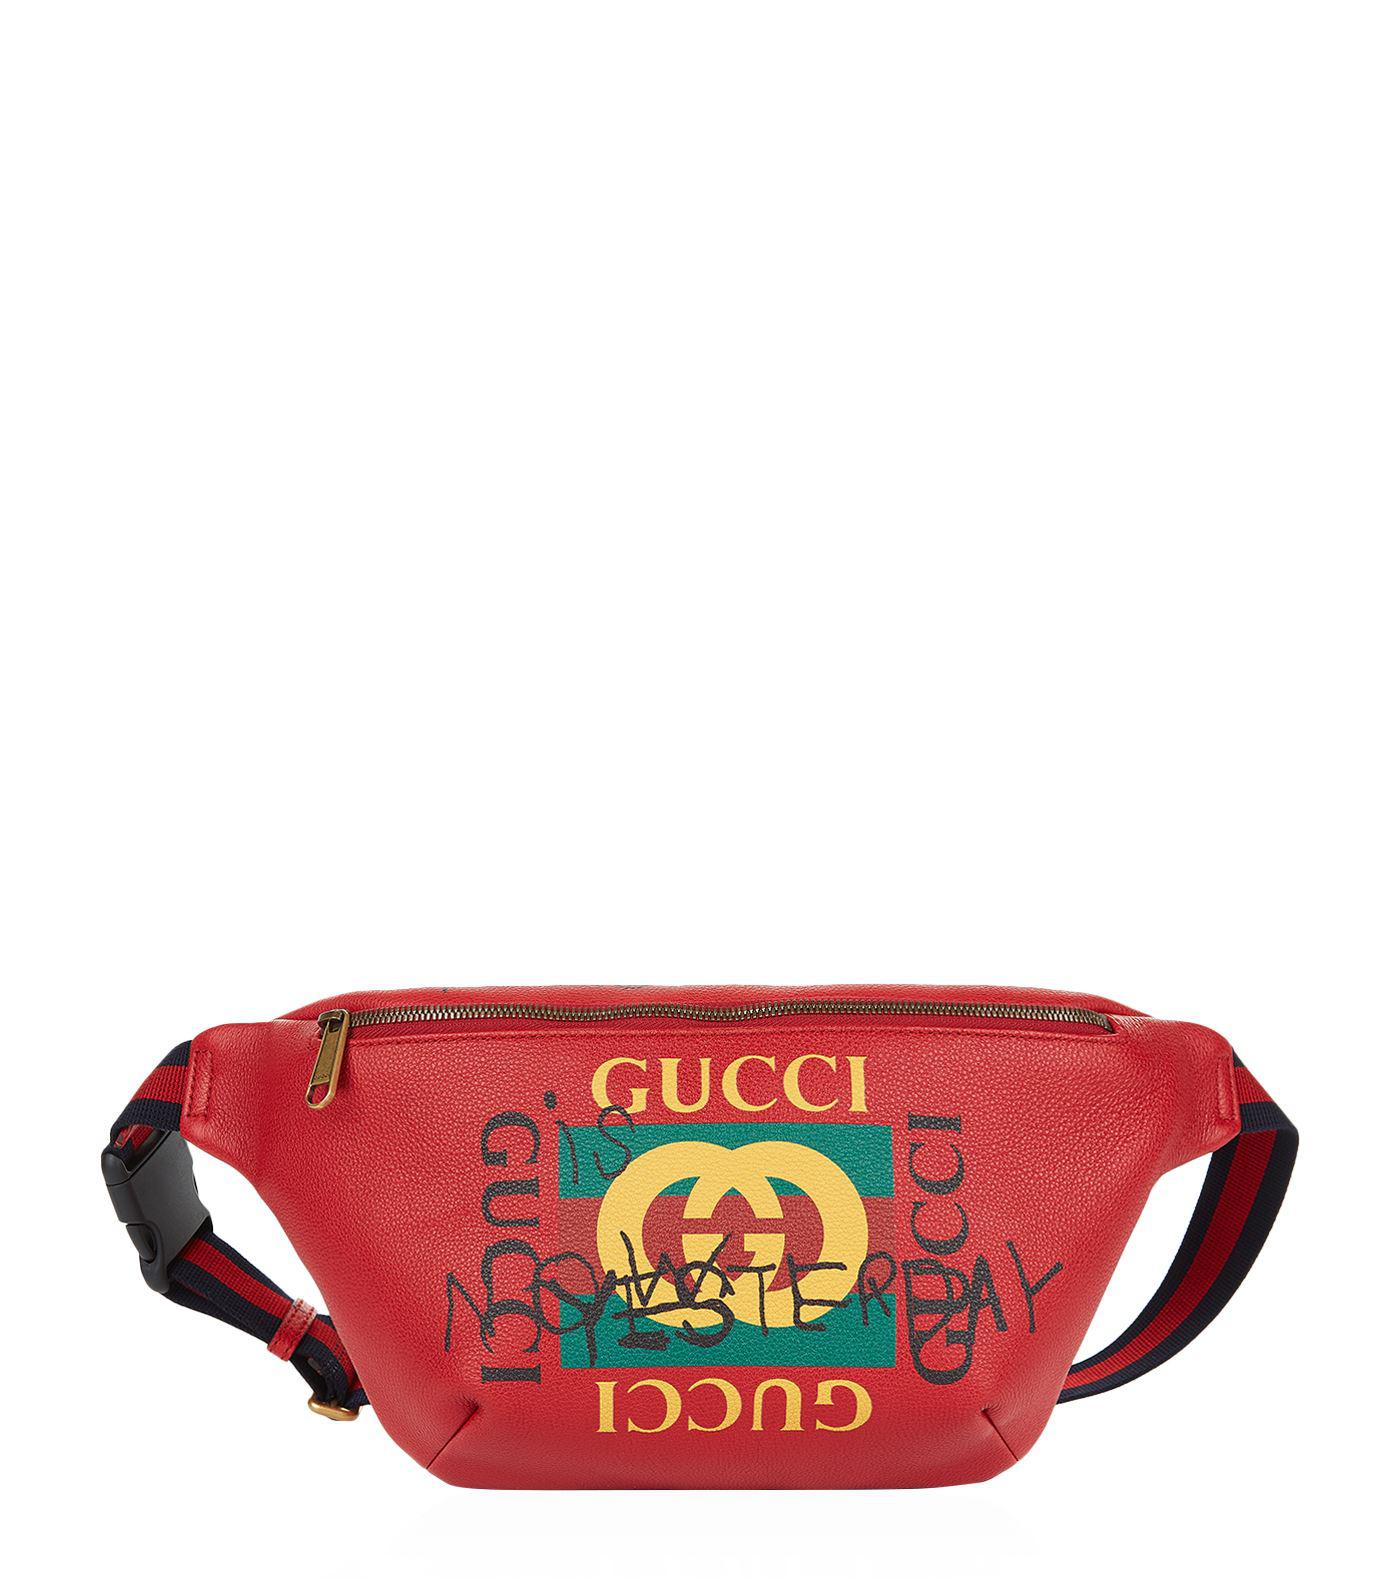 Gucci Leather Tomorrow Belt Bag in Red for Men - Lyst